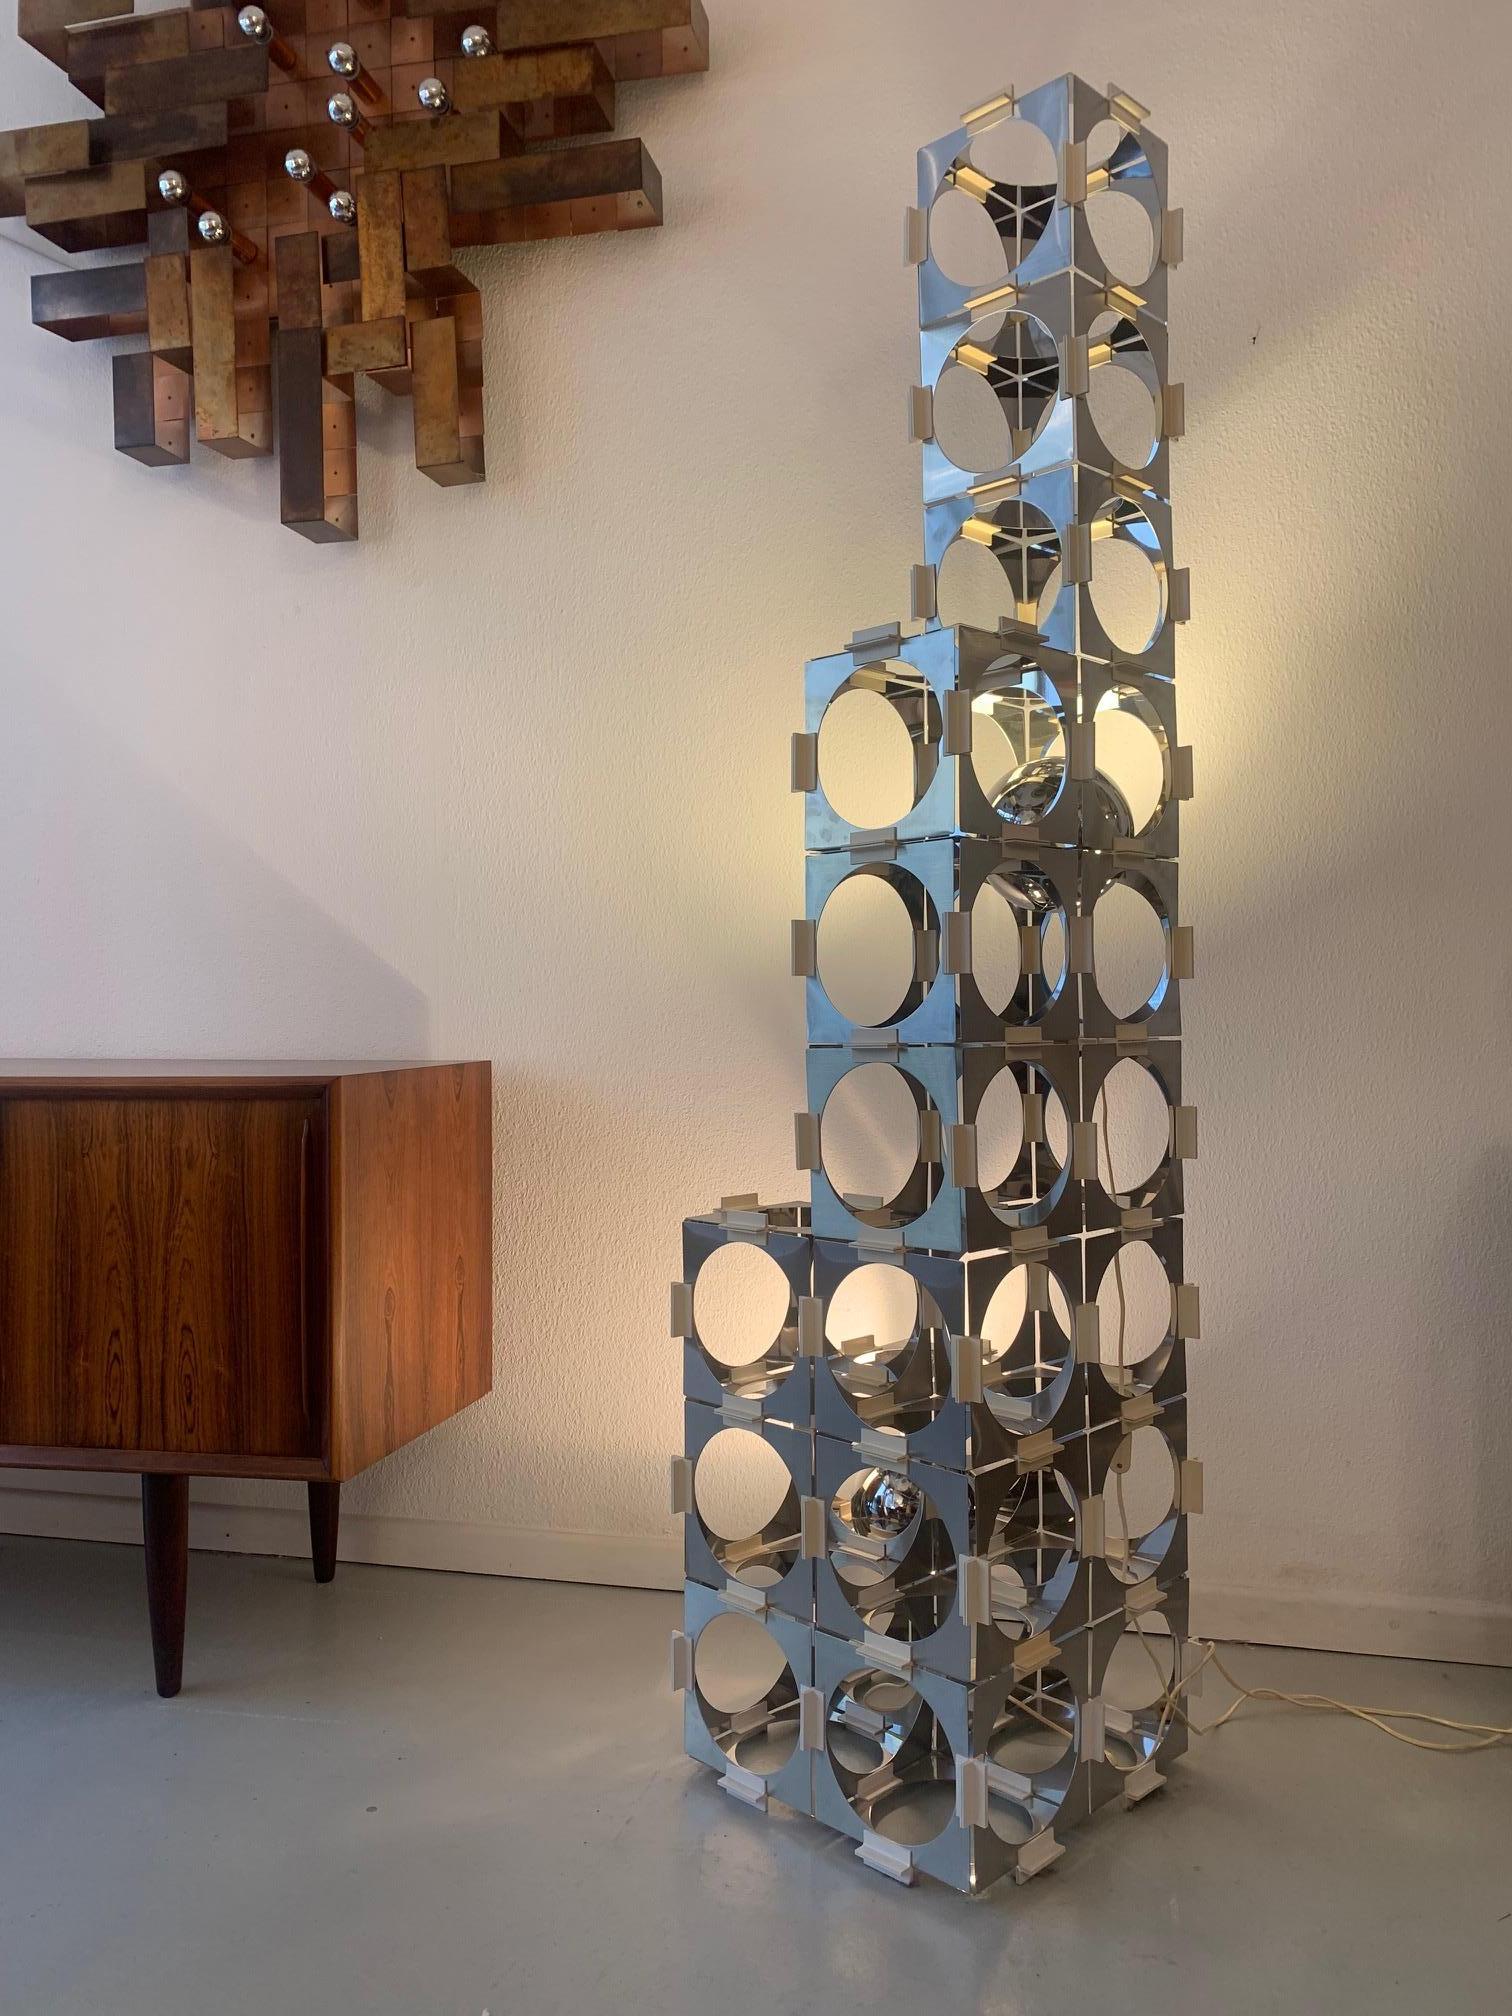 Rare Stainless Steel Skyscraper Modular Floor Lamp by Reggiani, Italy, ca. 1970s For Sale 5